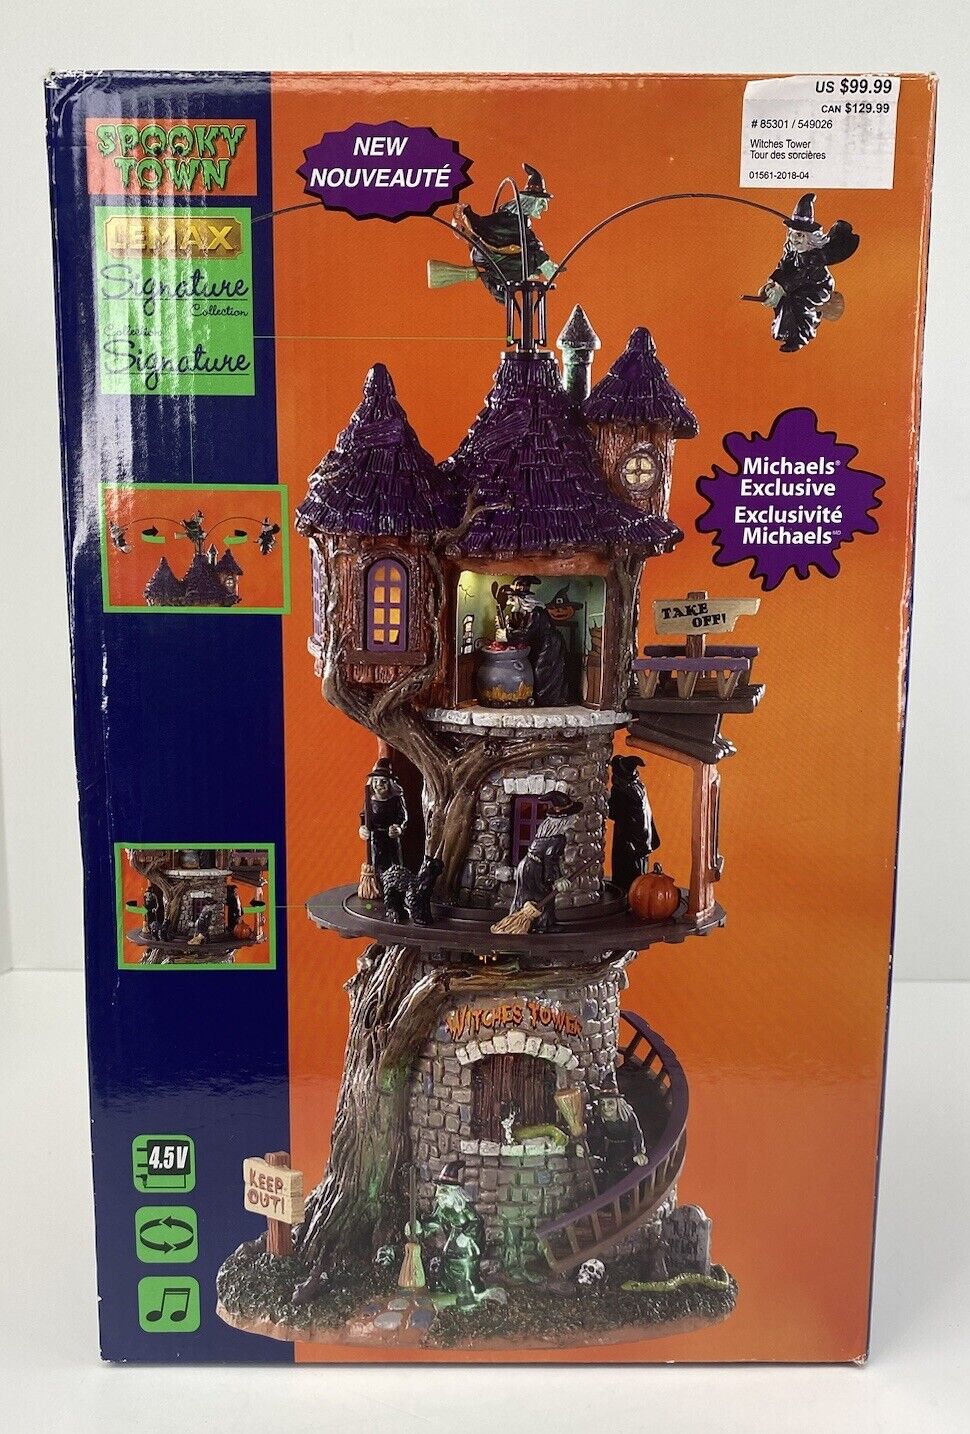 Lemax 2018 Spooky Town Witches Tower 85301 Halloween -Michaels Exclusive -Tested